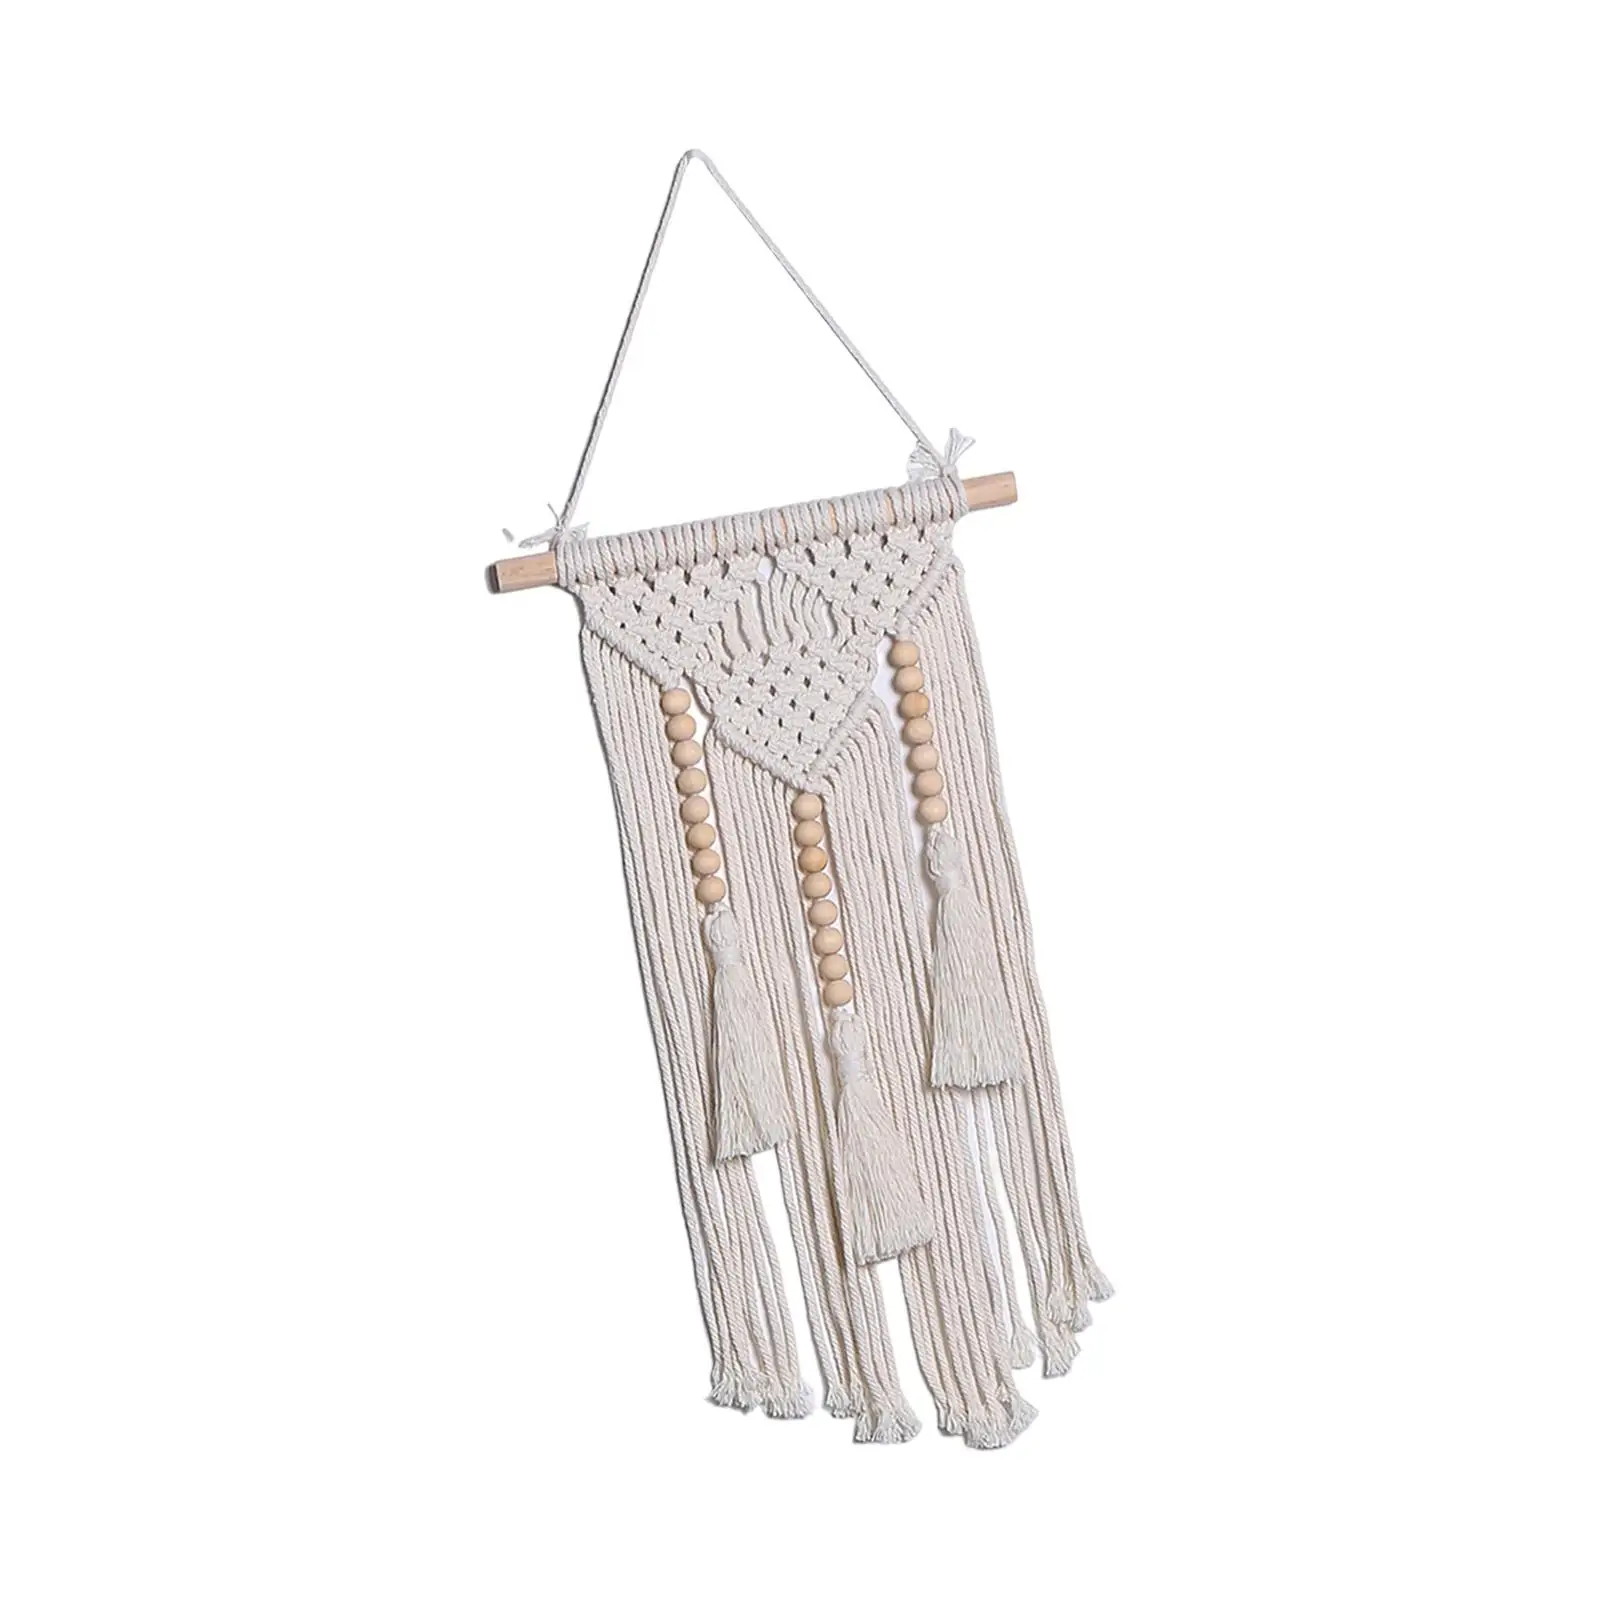 Macrame Wall Hanging with Wood Beads White Macrame Tapestry Boho Decor for Window Nursery Apartment Backdrop Gallery